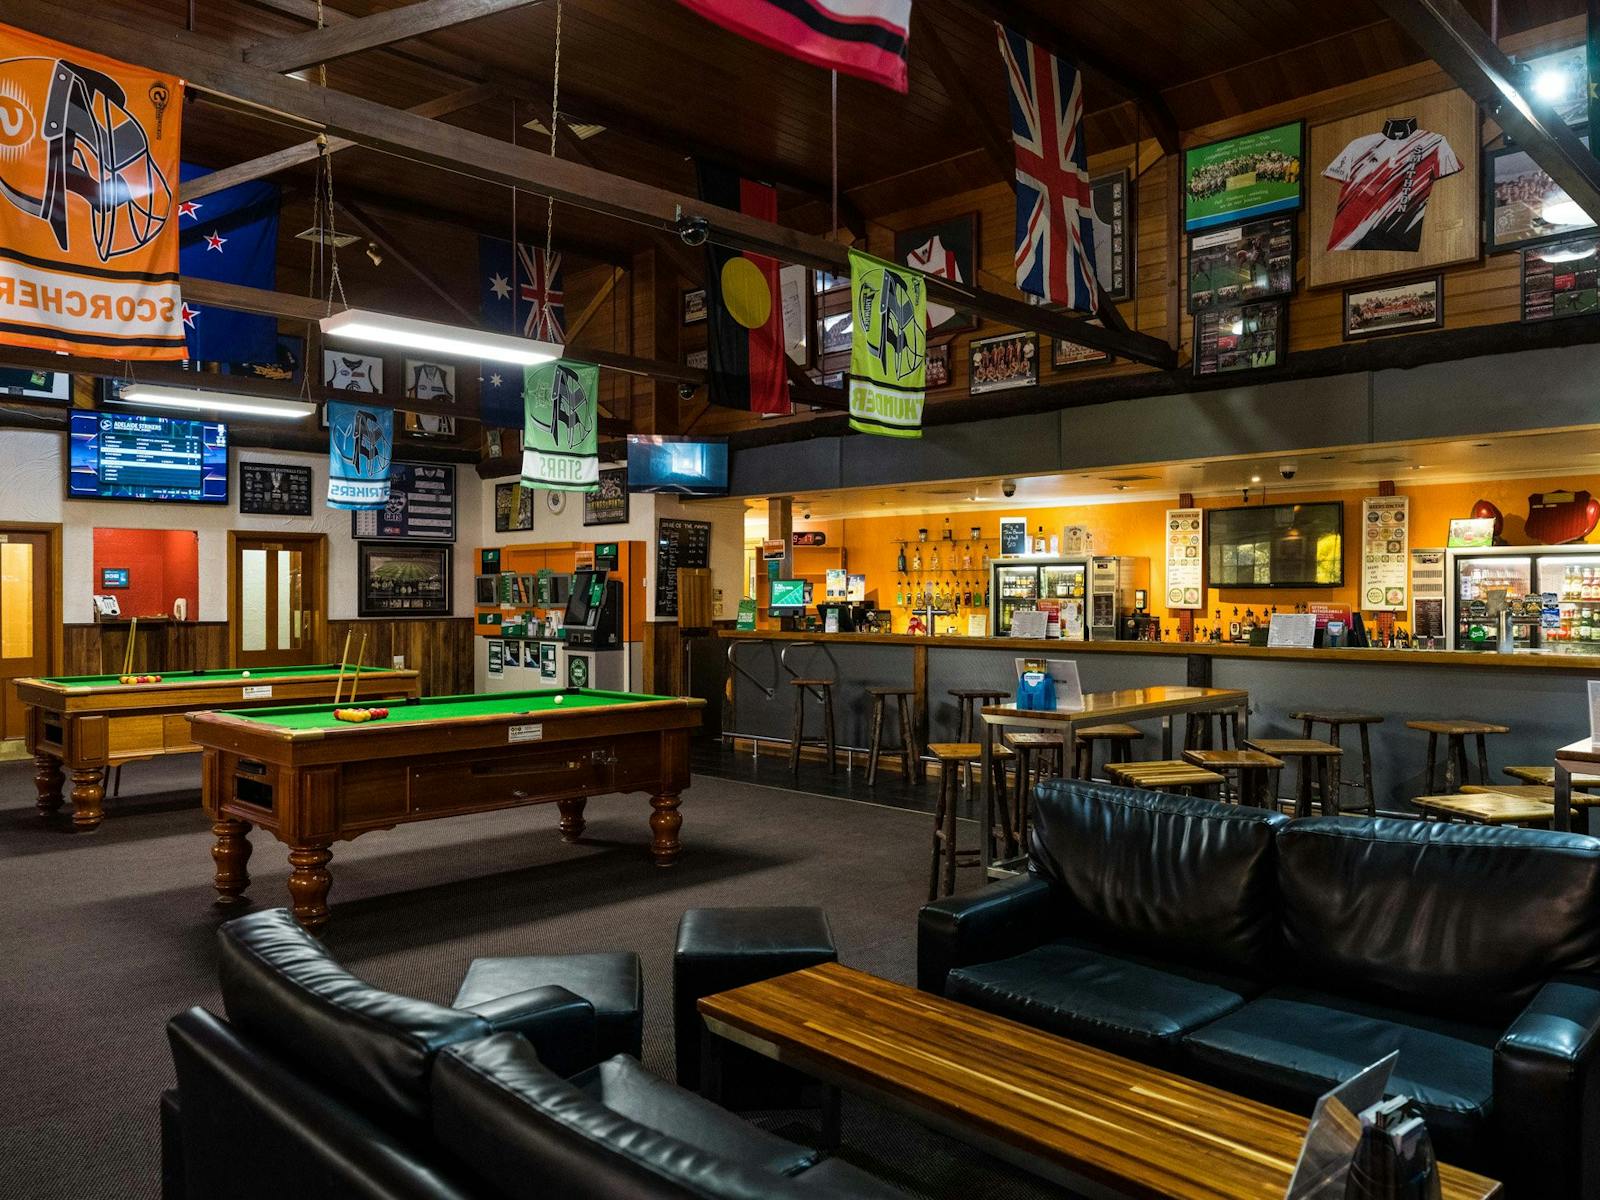 Bar filled with couches, high tables with stools, bar, TAB, pool tables & sports memorabilia